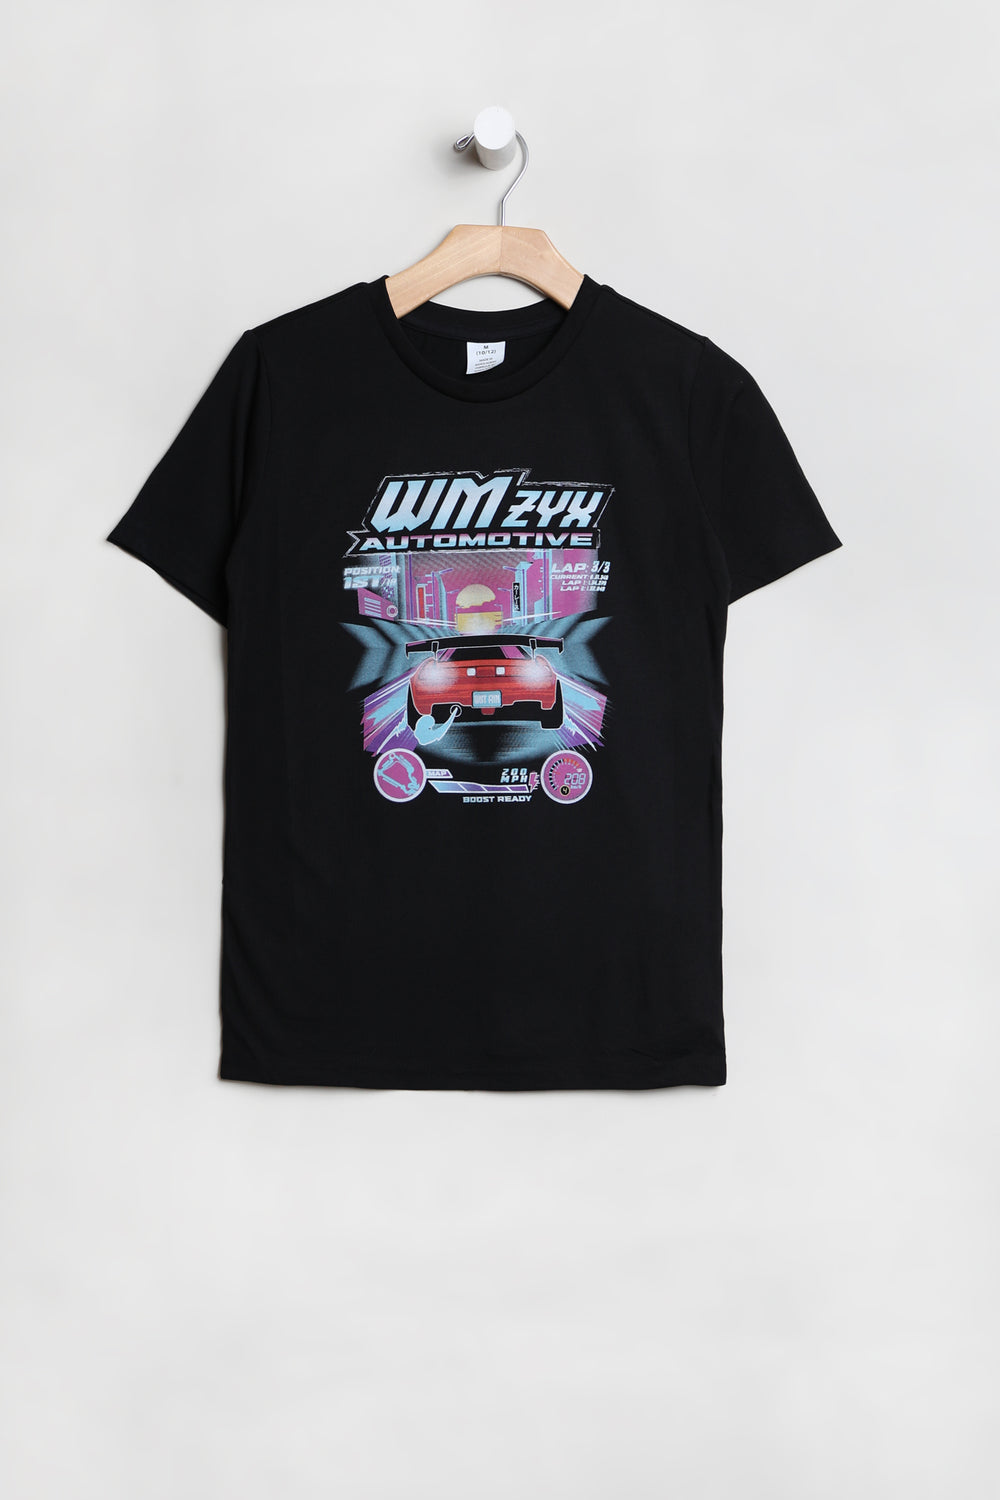 West49 Youth Automotive Racing T-Shirt West49 Youth Automotive Racing T-Shirt